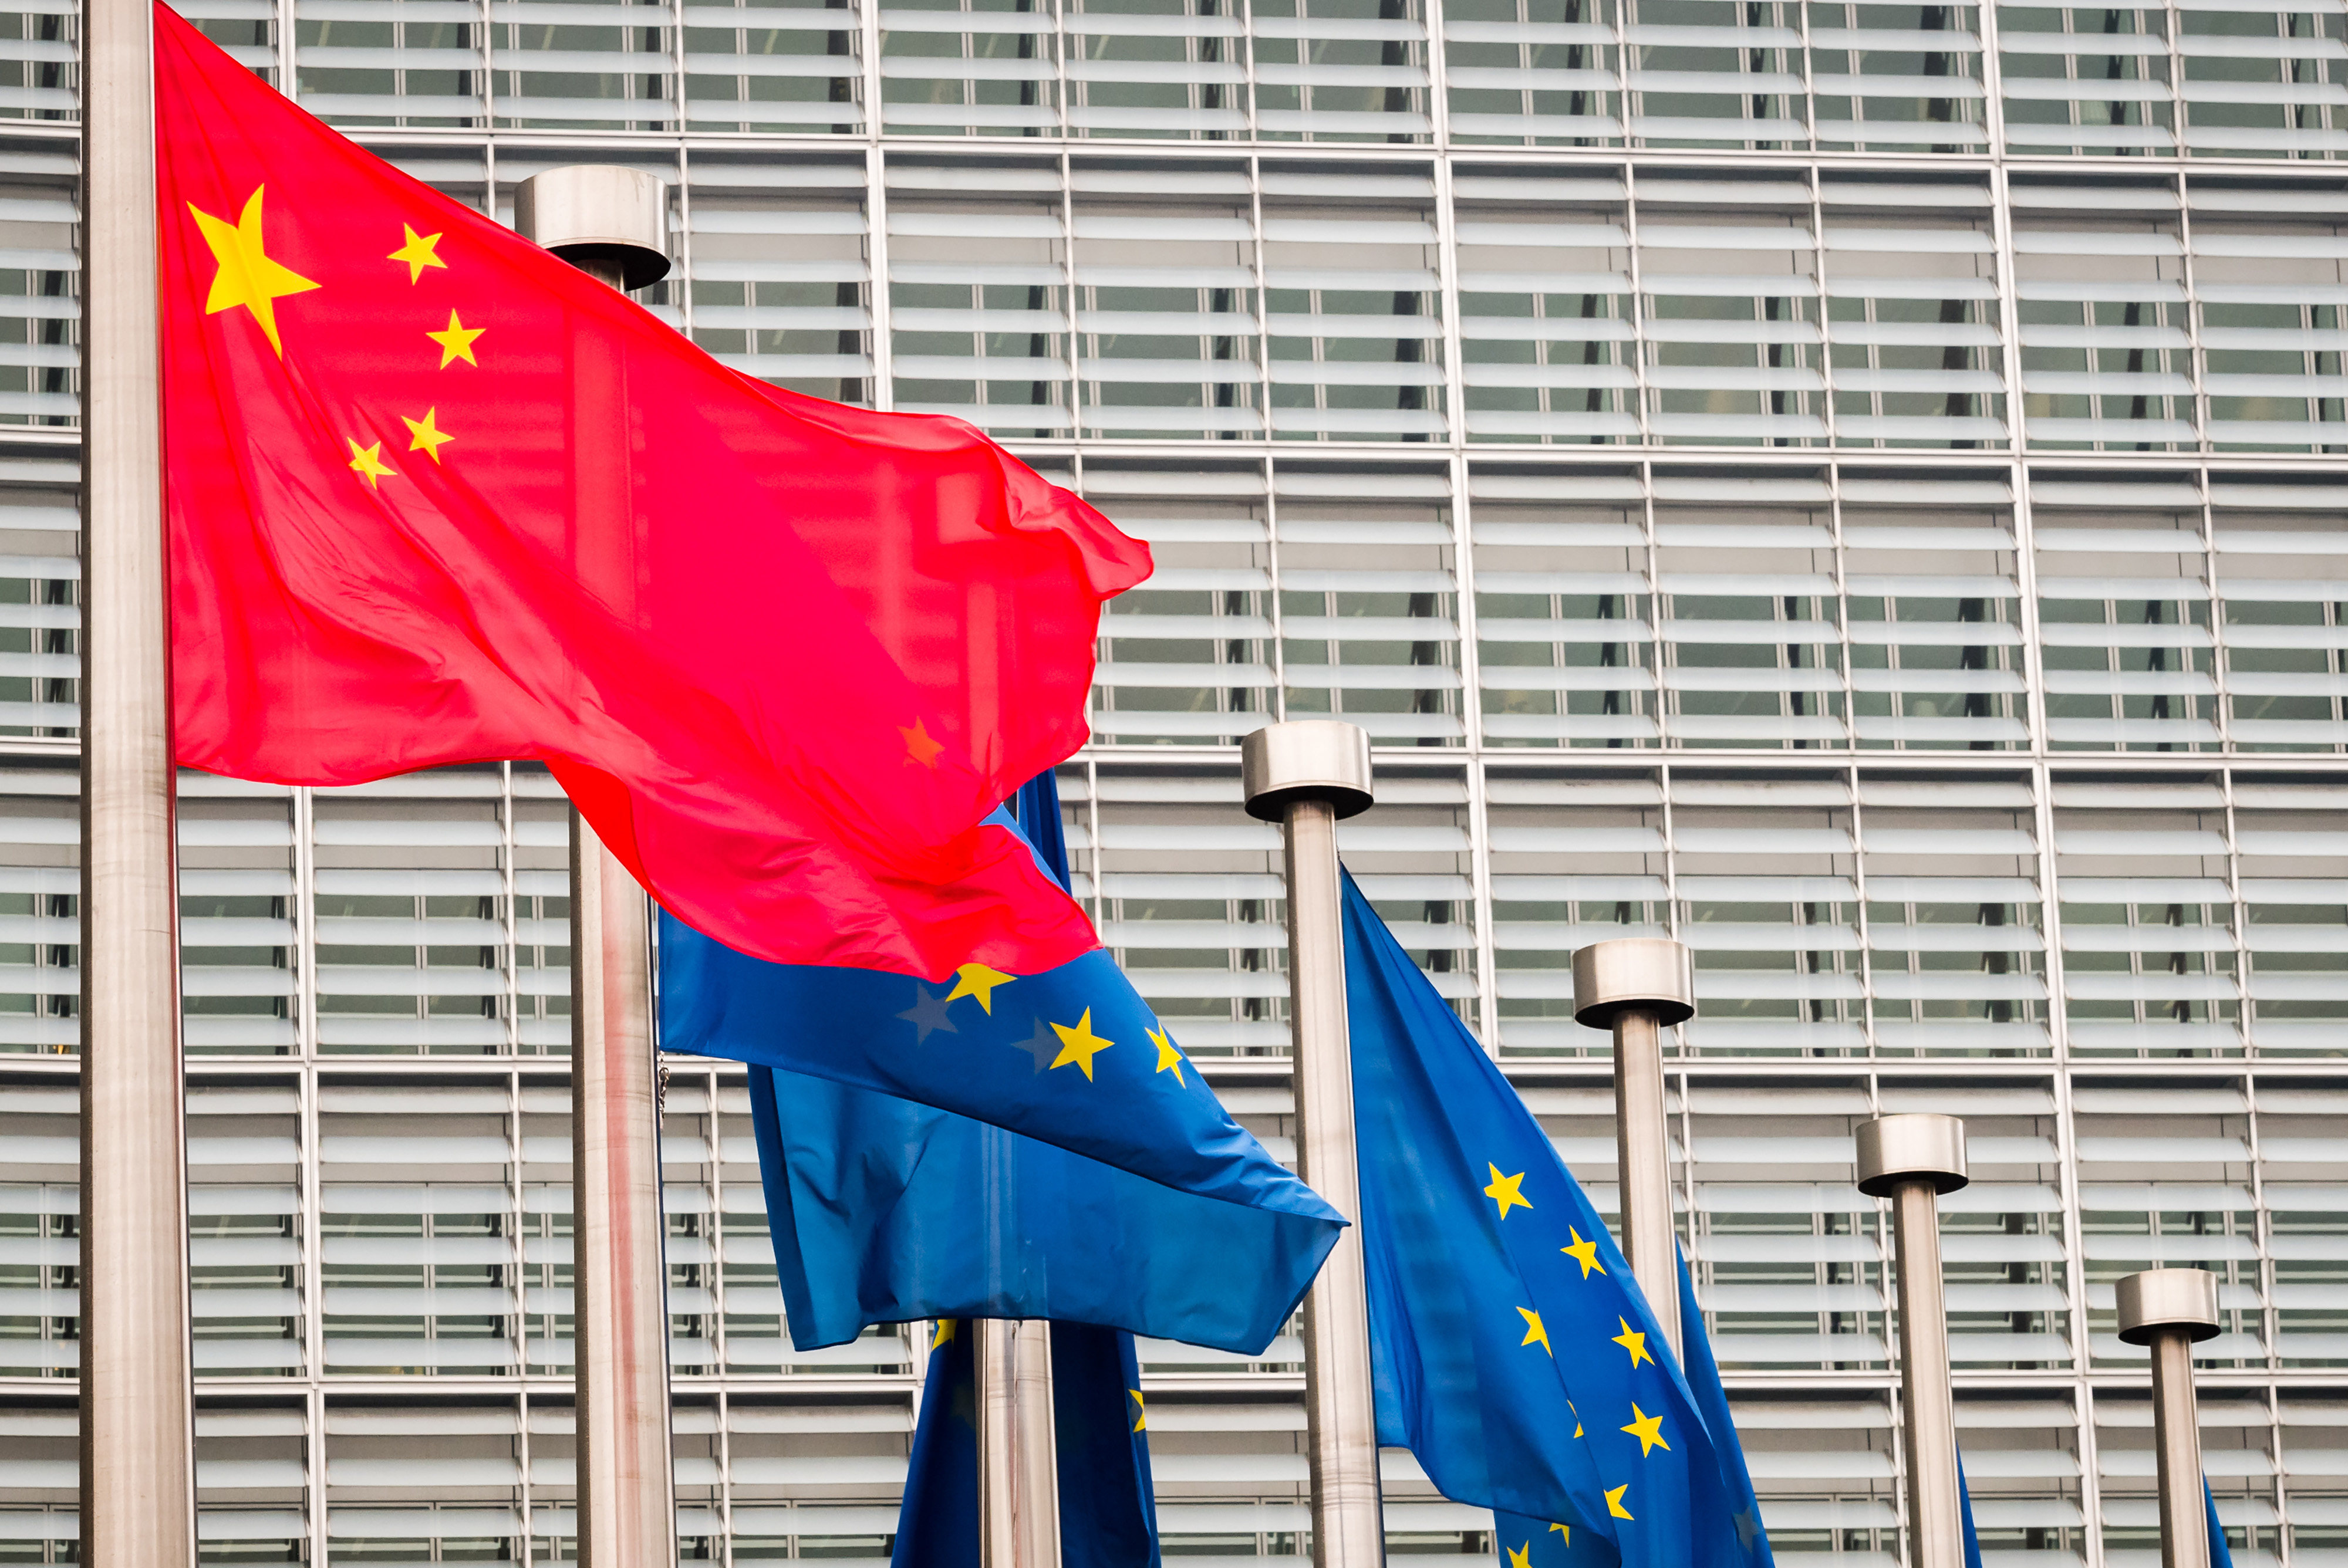 Jens Eskelund, president of the EU Chamber of Commerce in China, says a real challenge is whether Beijing can “offer the menu that investors are craving”. Photo: Bloomberg